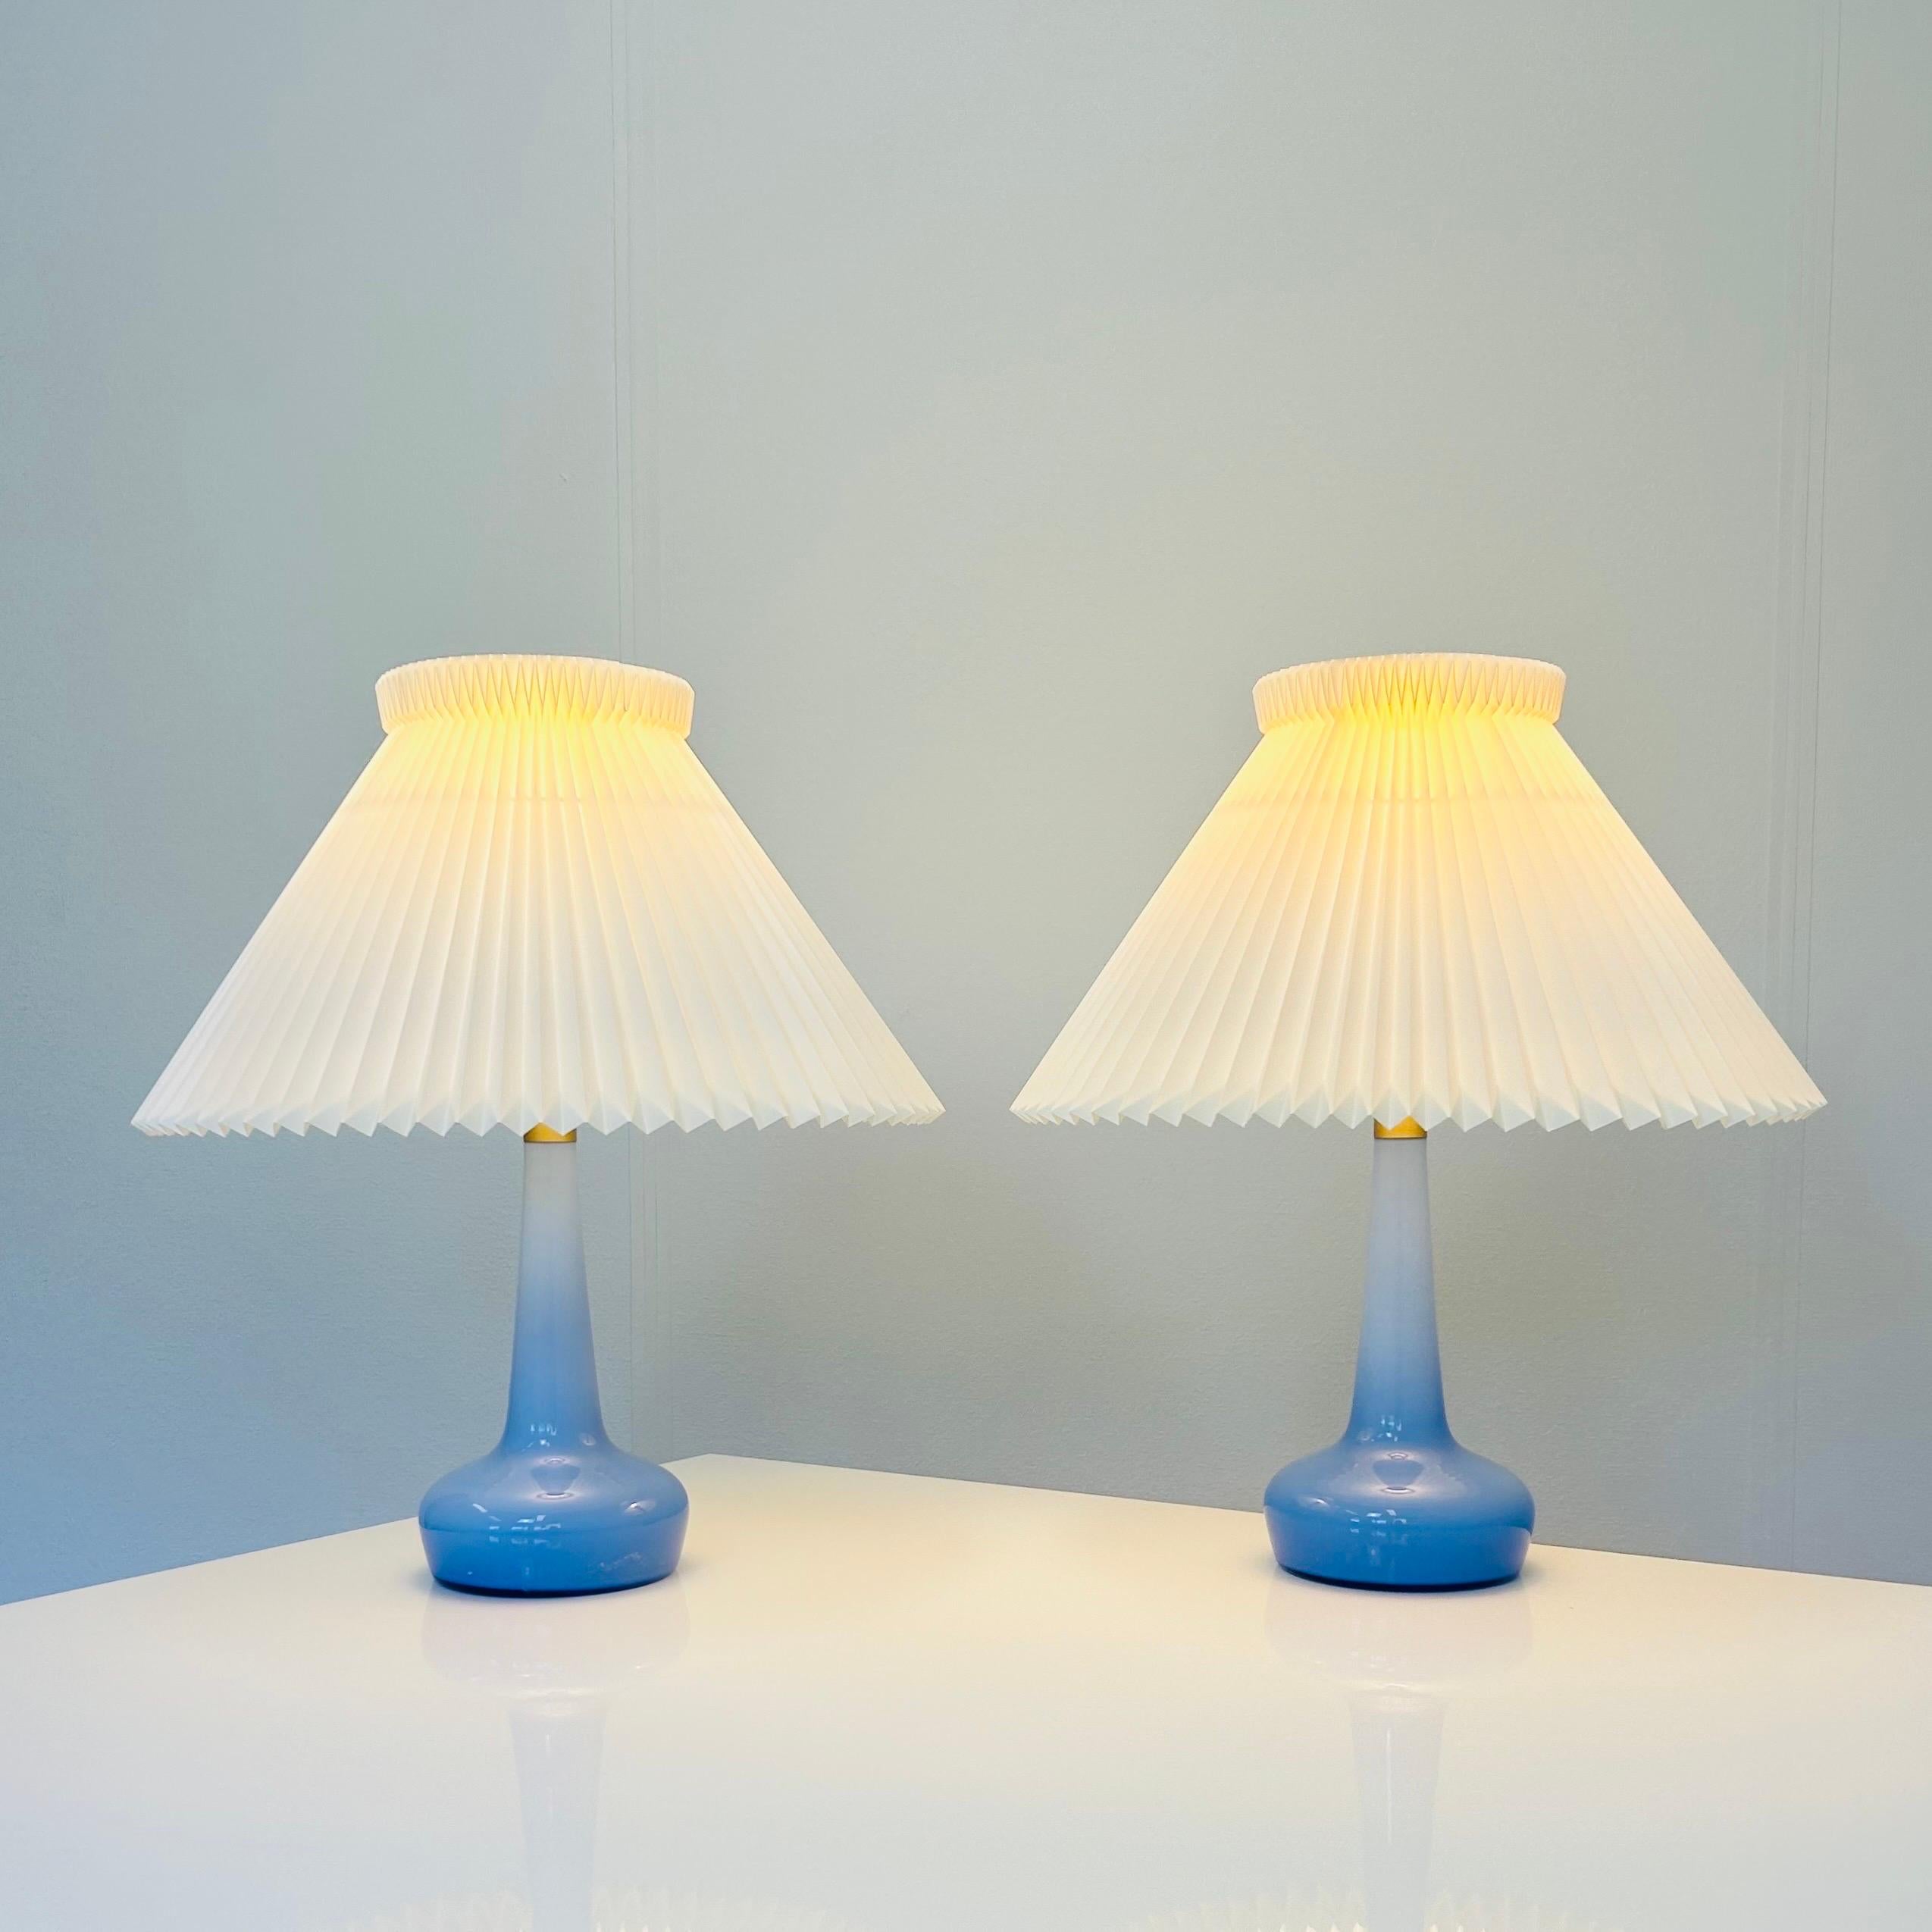 A pair of exquisite blue glass desk lamps designed by Esben Klint for Le Klint in 1949. This rare and captivating set is from the 1980s. These lamps have stood the test of time and are in impeccable vintage condition. With a stylish allure, they are